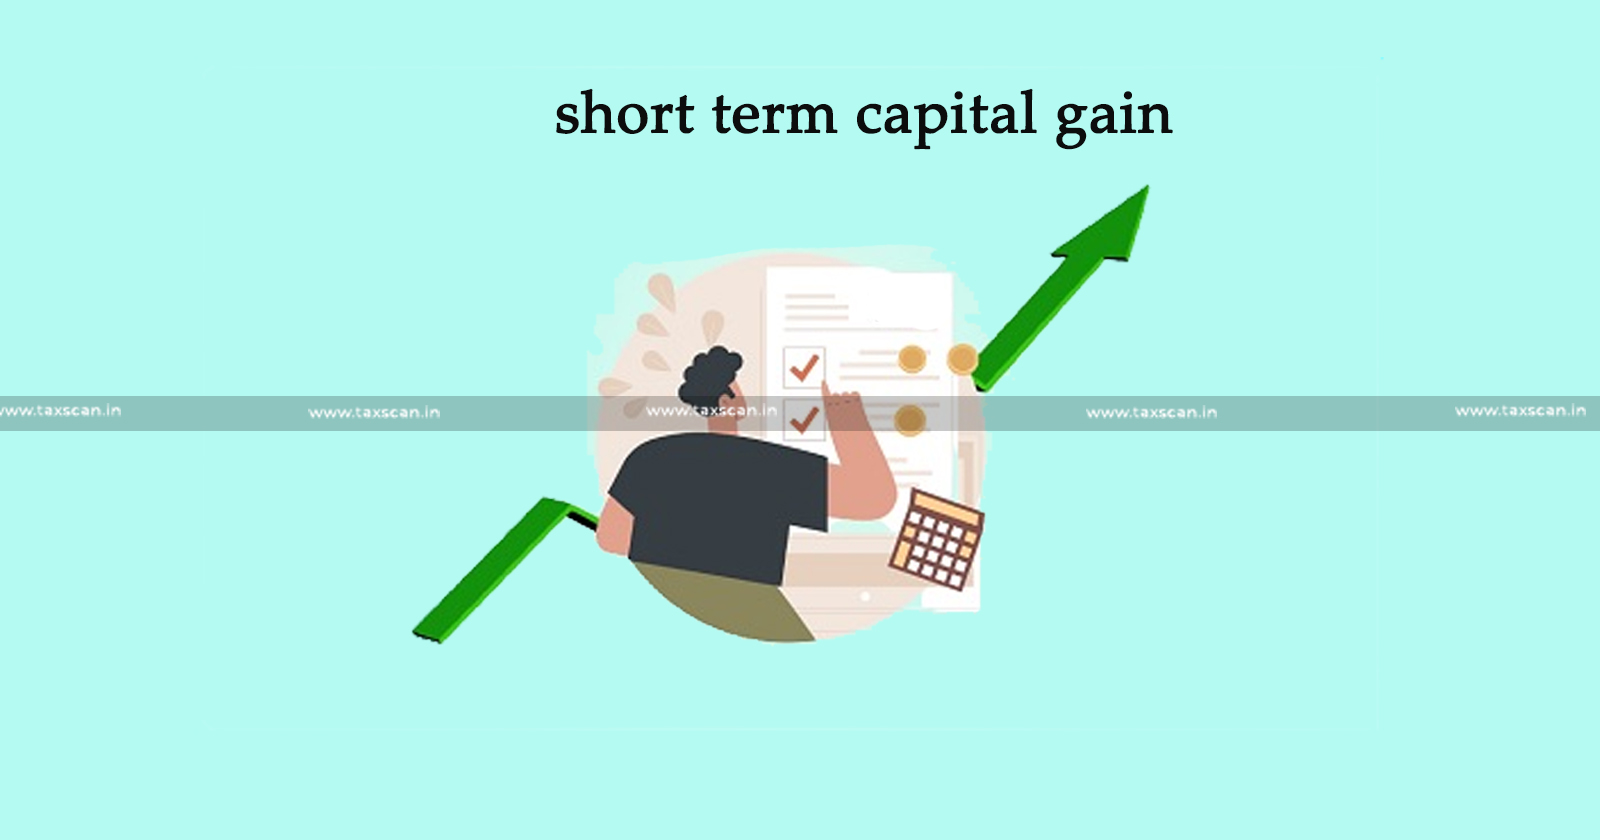 Short term Capital Gain - Capital Gain - Short Span of time - Short term Capital Gain disposed off within a Short Span of time will not justify the gain to be treated as Business Income